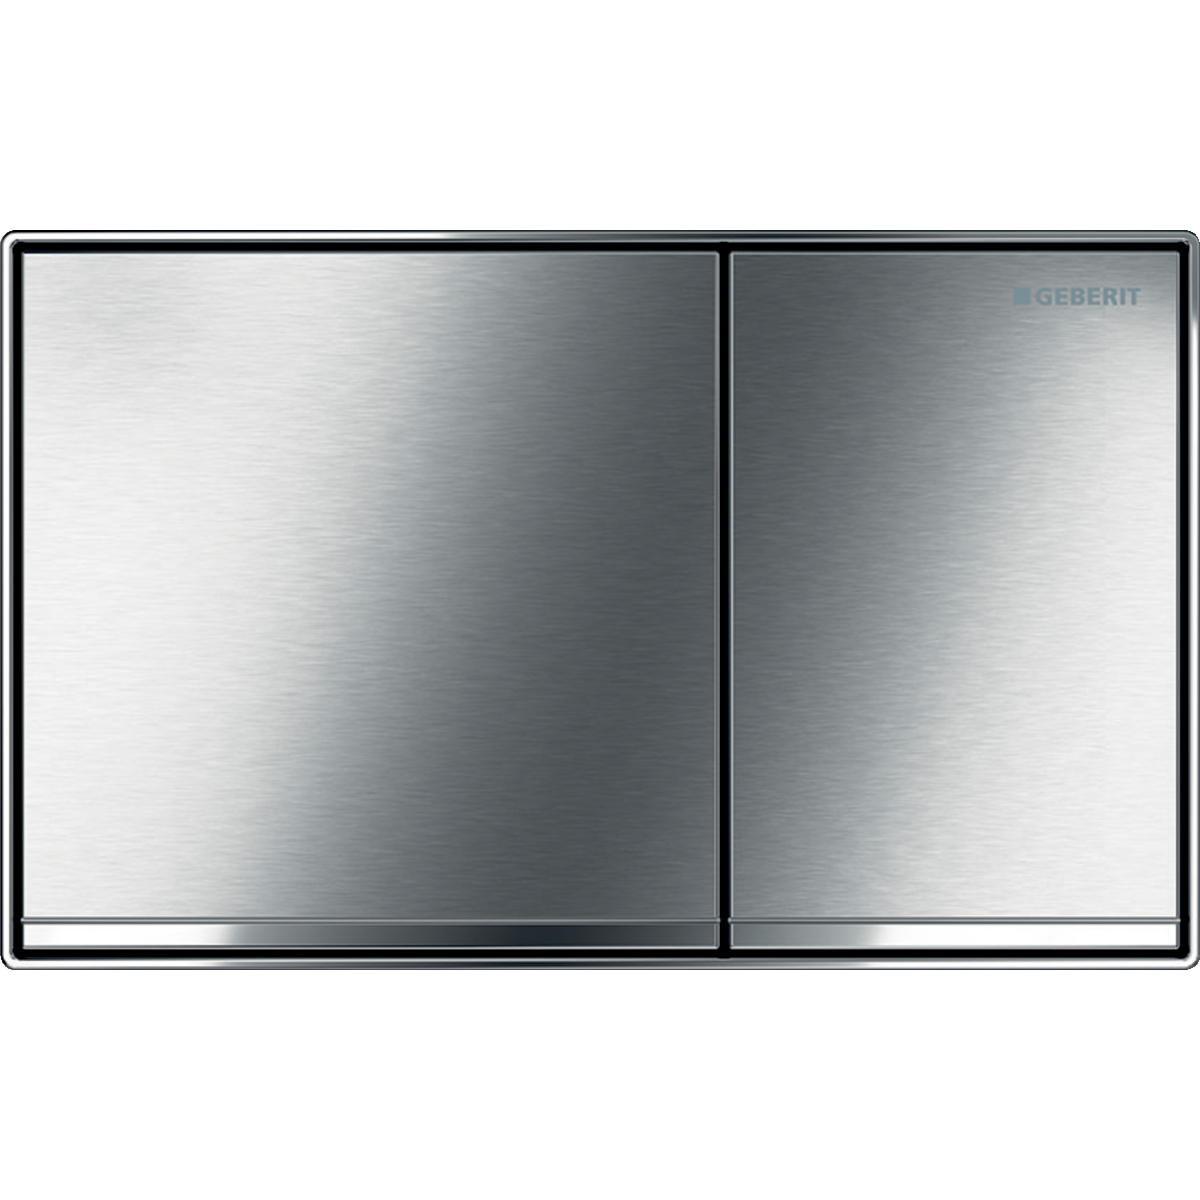 Geberit 115.640.GH.1 Actuator Plate Sigma60 for Dual Flush, Surface-Even - Brushed Chrome